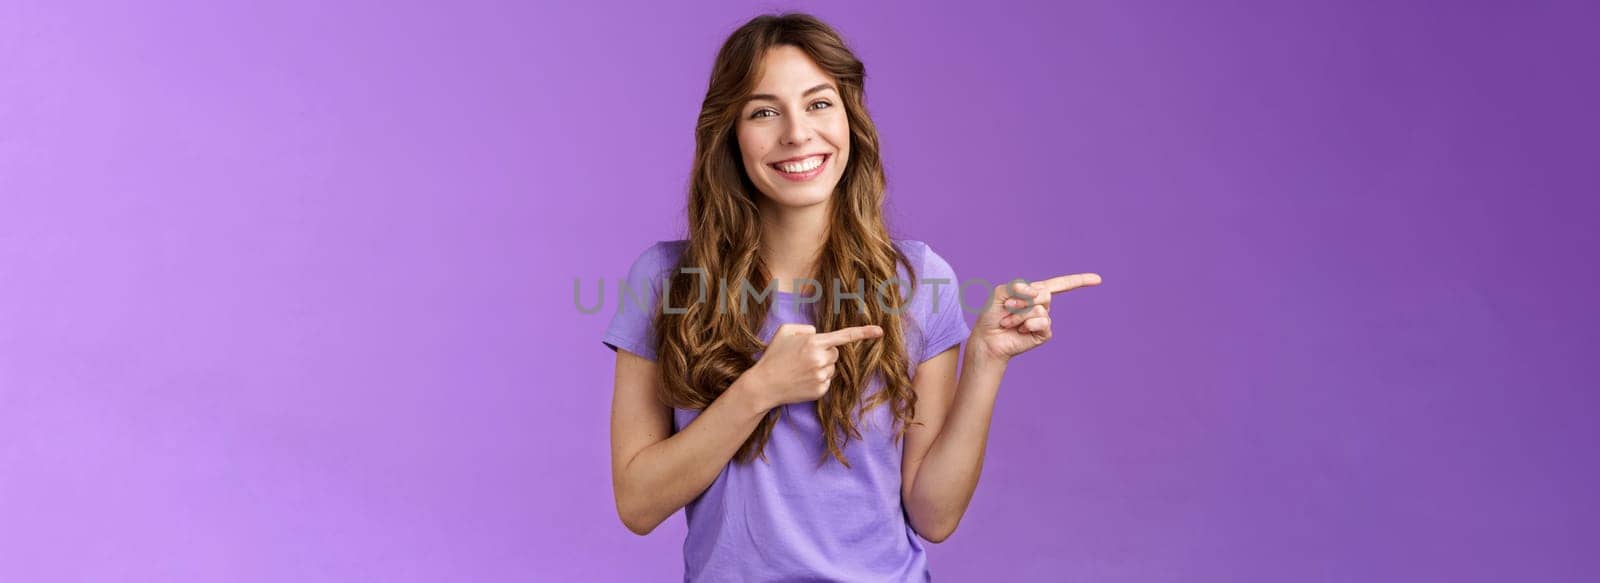 You need see yourself introduce new product. Enthusiastic happy smiling toothy girl curly hairstyle promoting cool cafe menu pointing index finger left smiling broadly stand purple background.